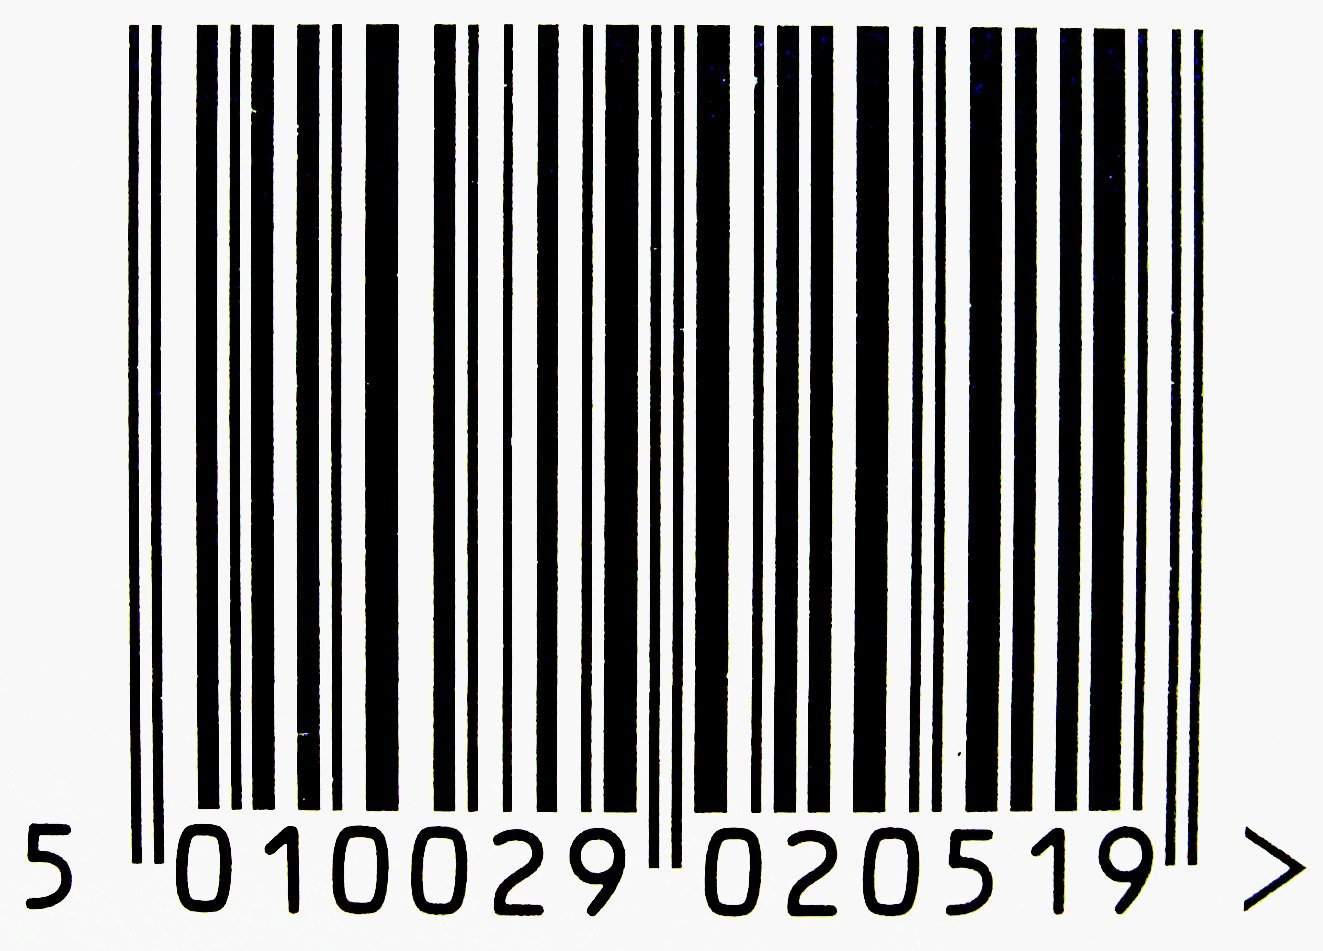 a barcode code that reads'get out '